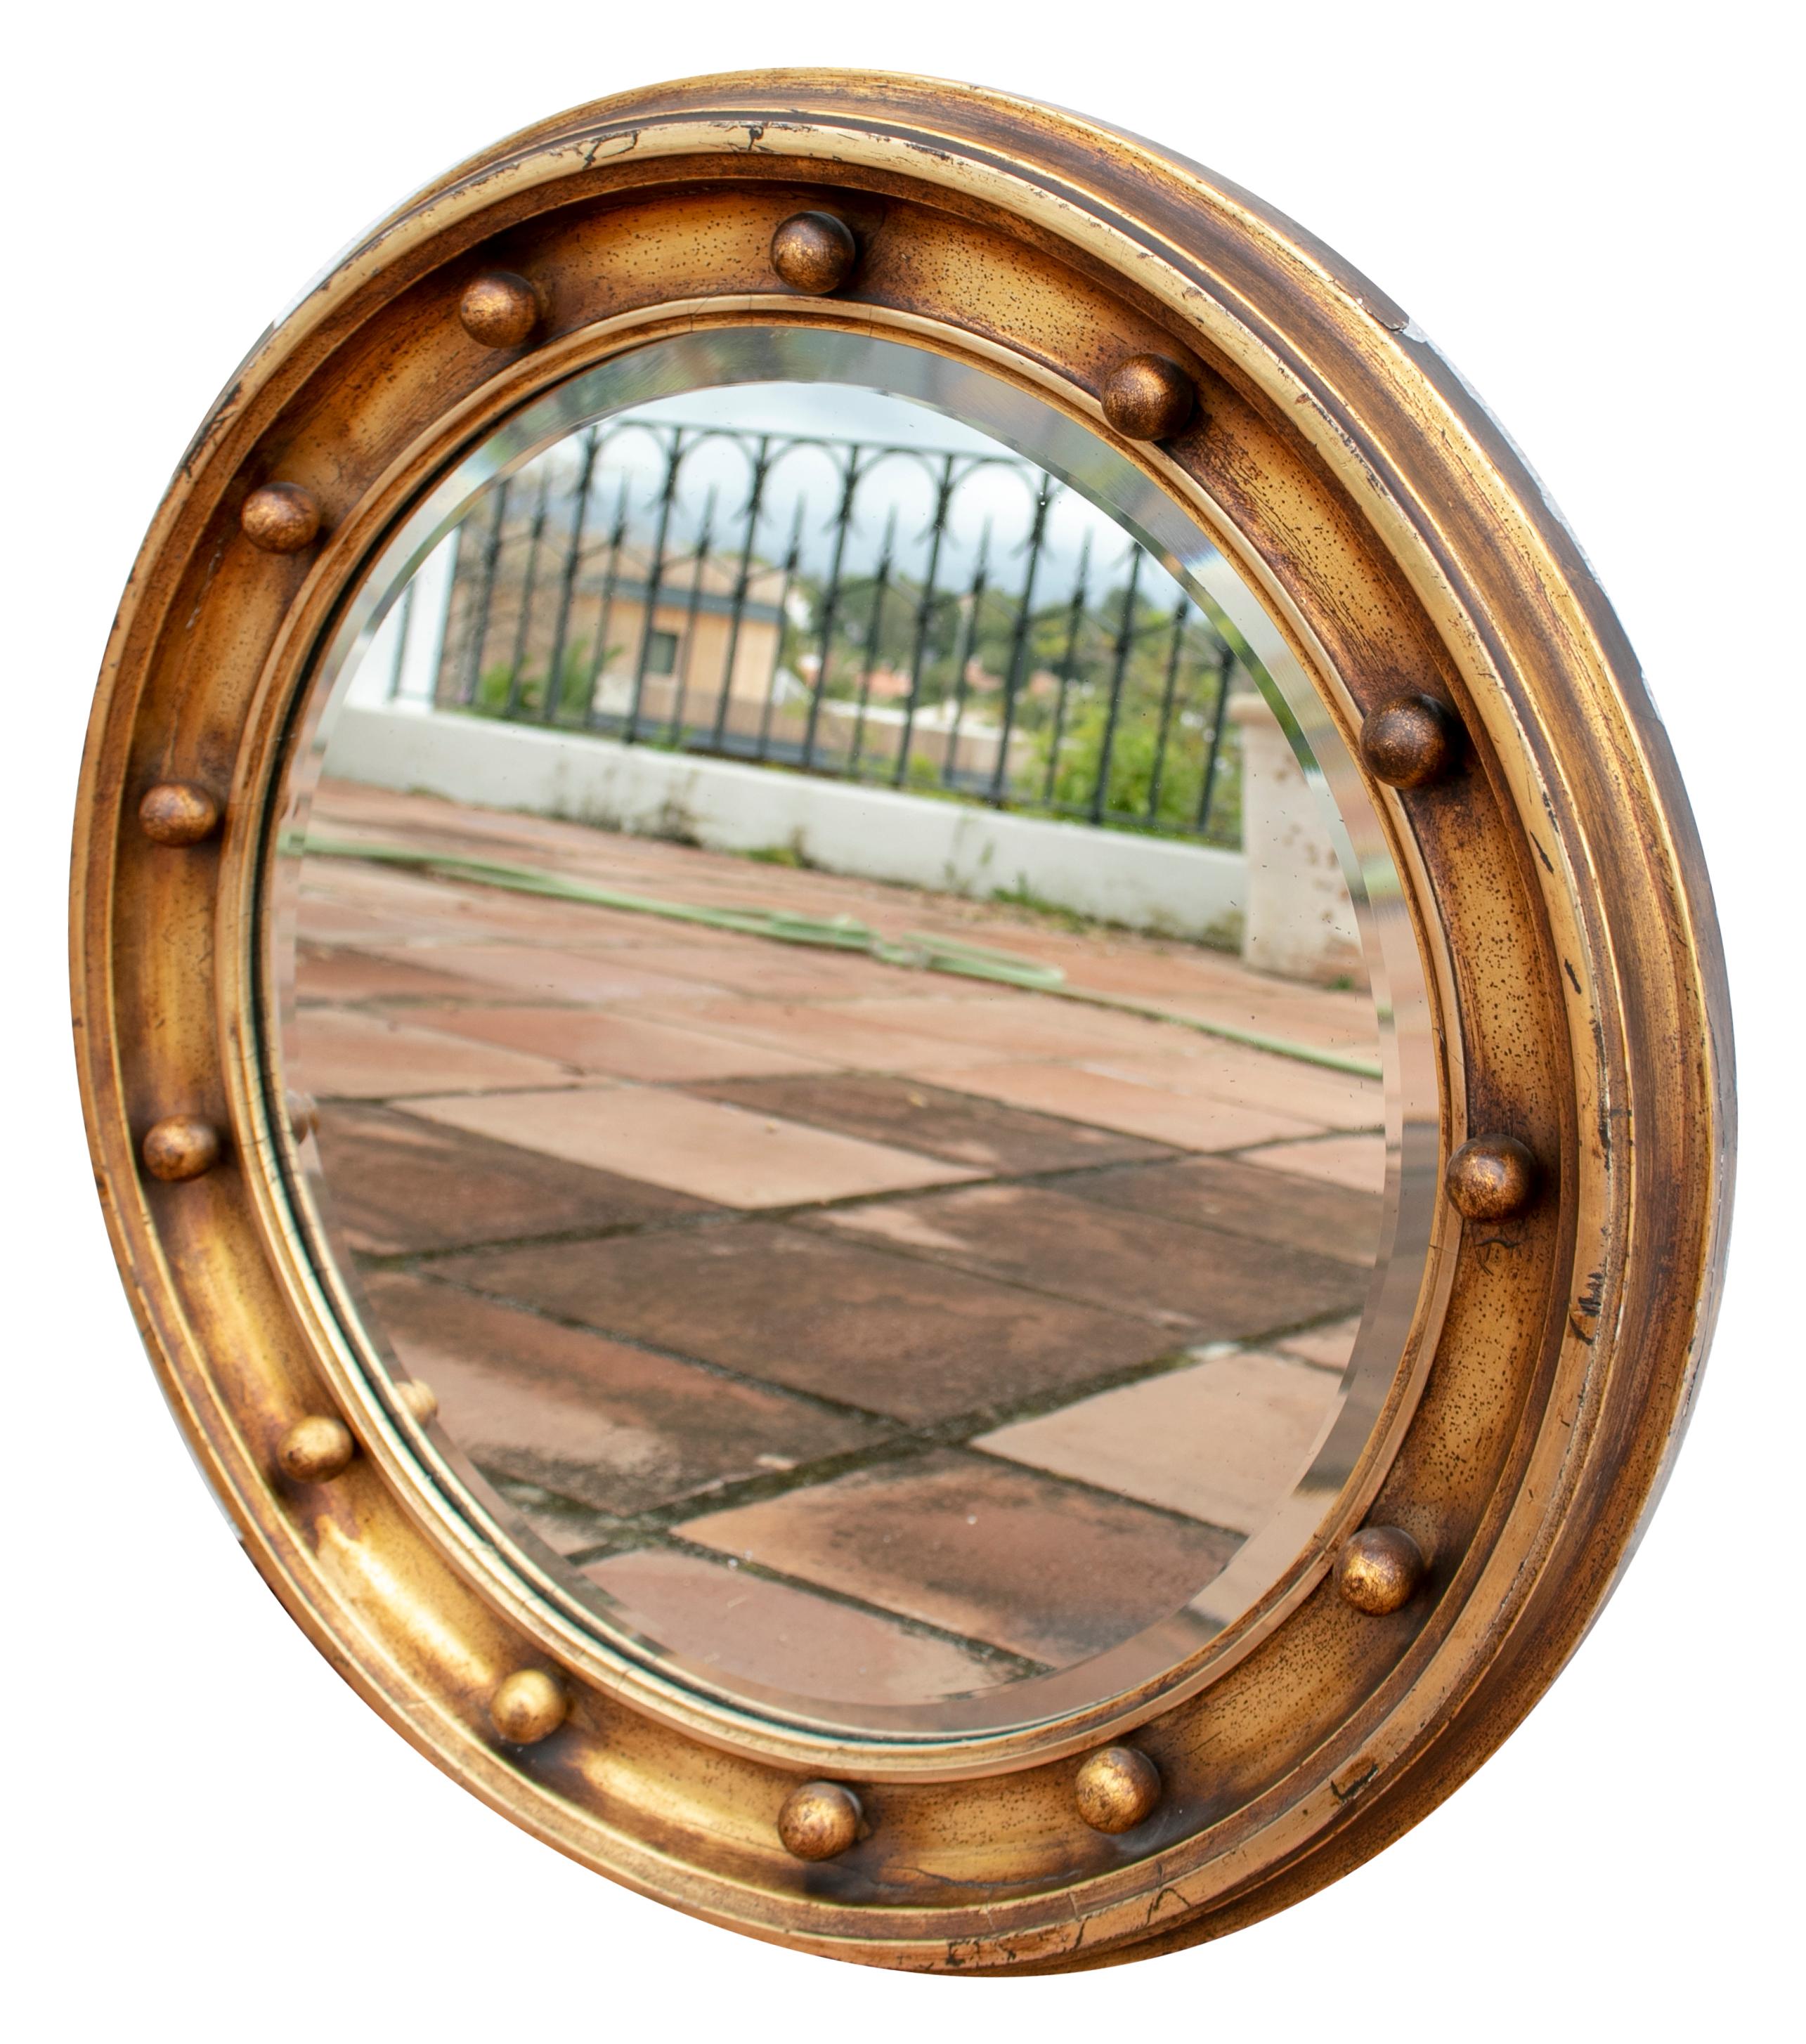 19th century French round mirror with ball decorations.